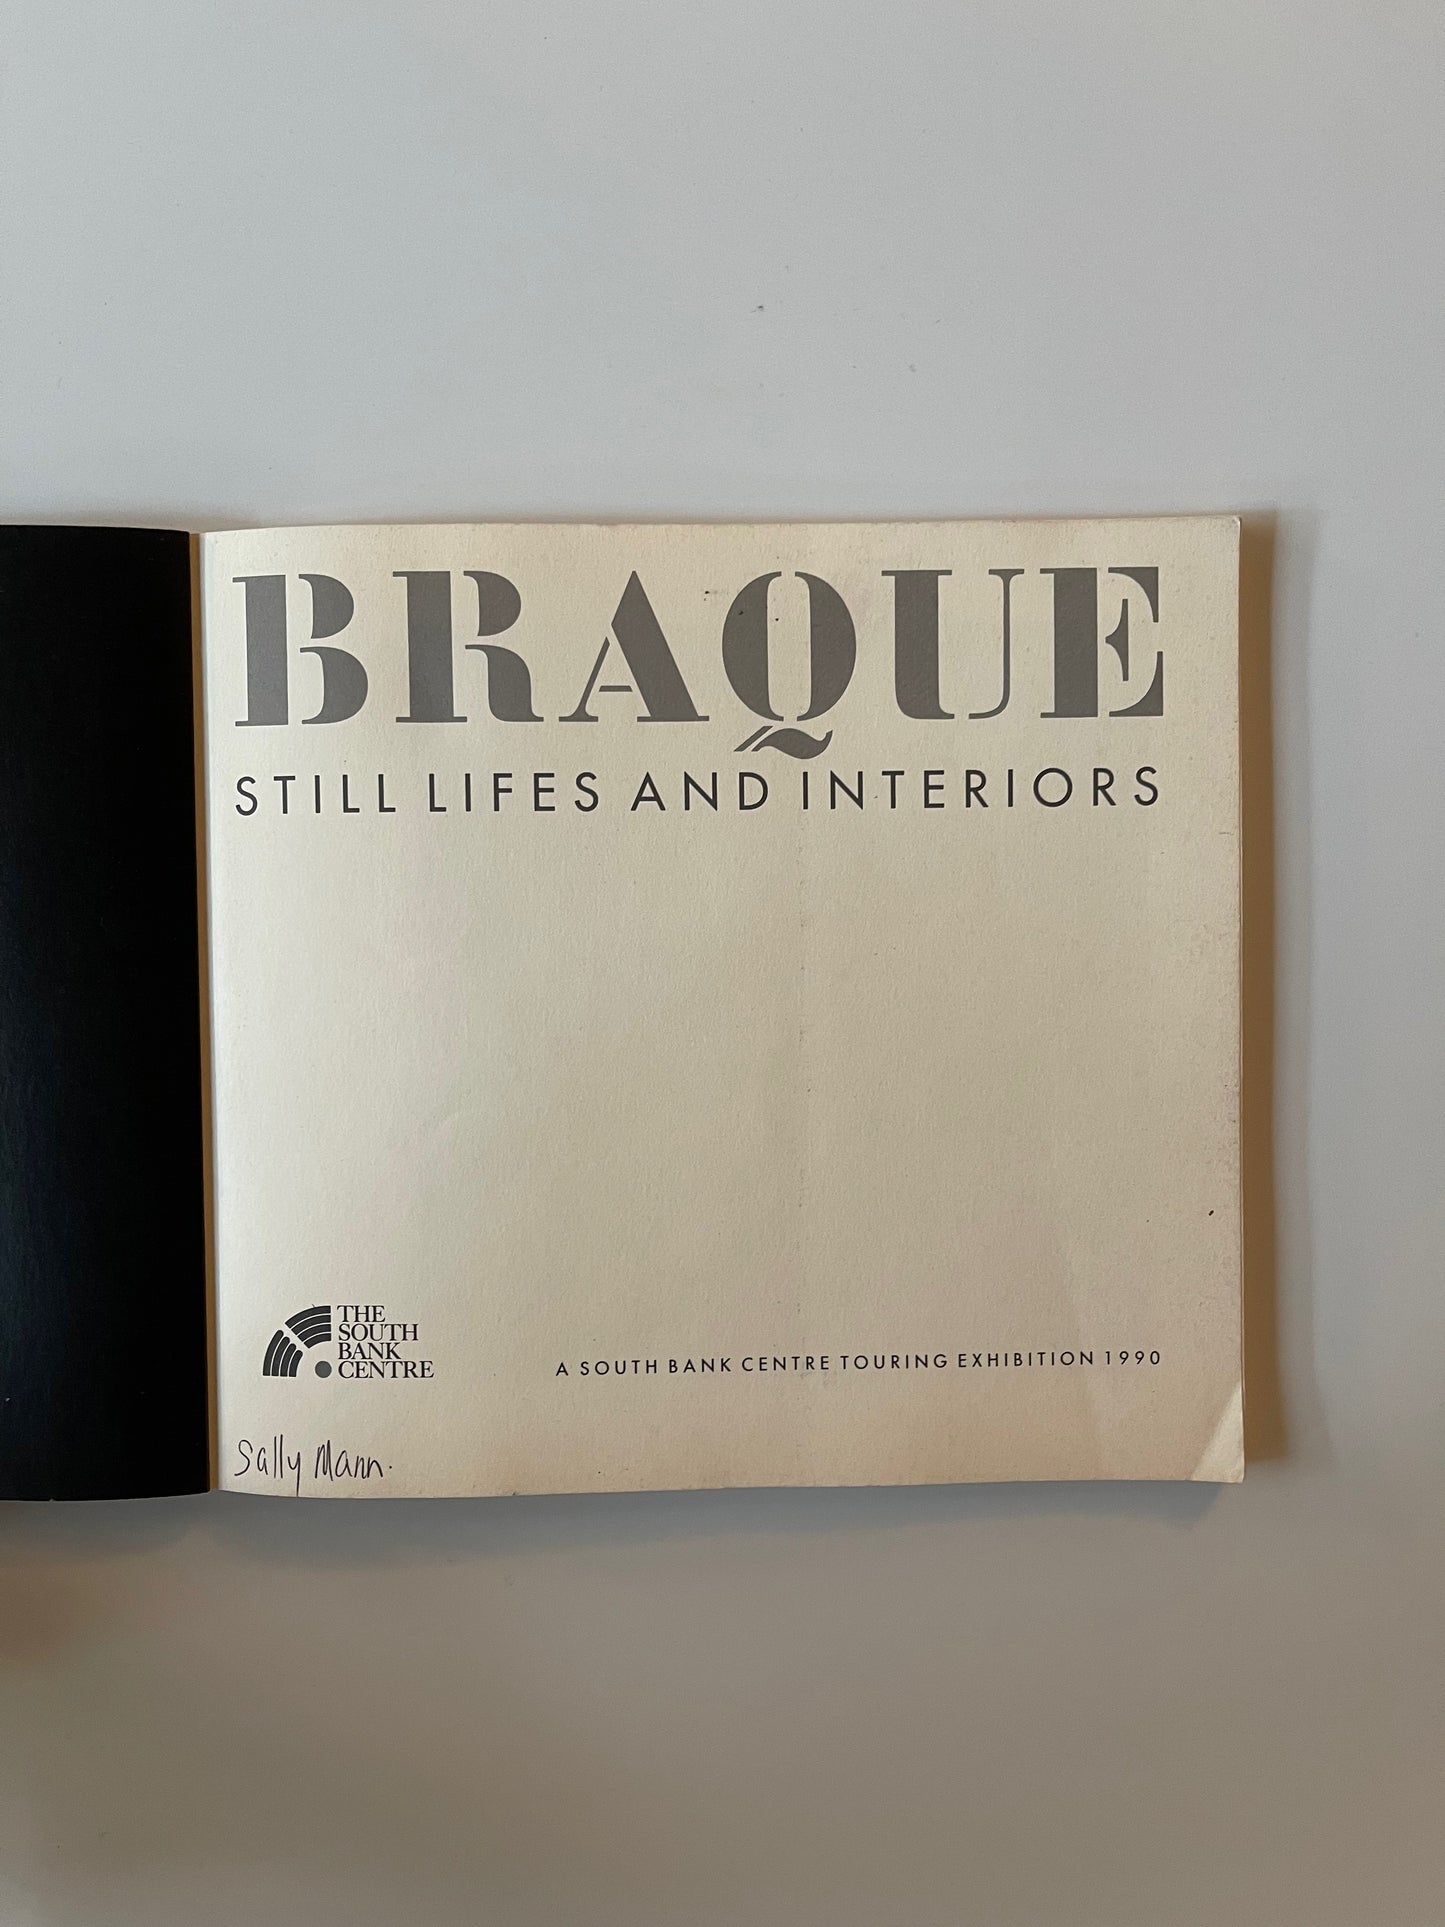 Braque: Still Lifes and Interiors, The South Bank Centre, 1990